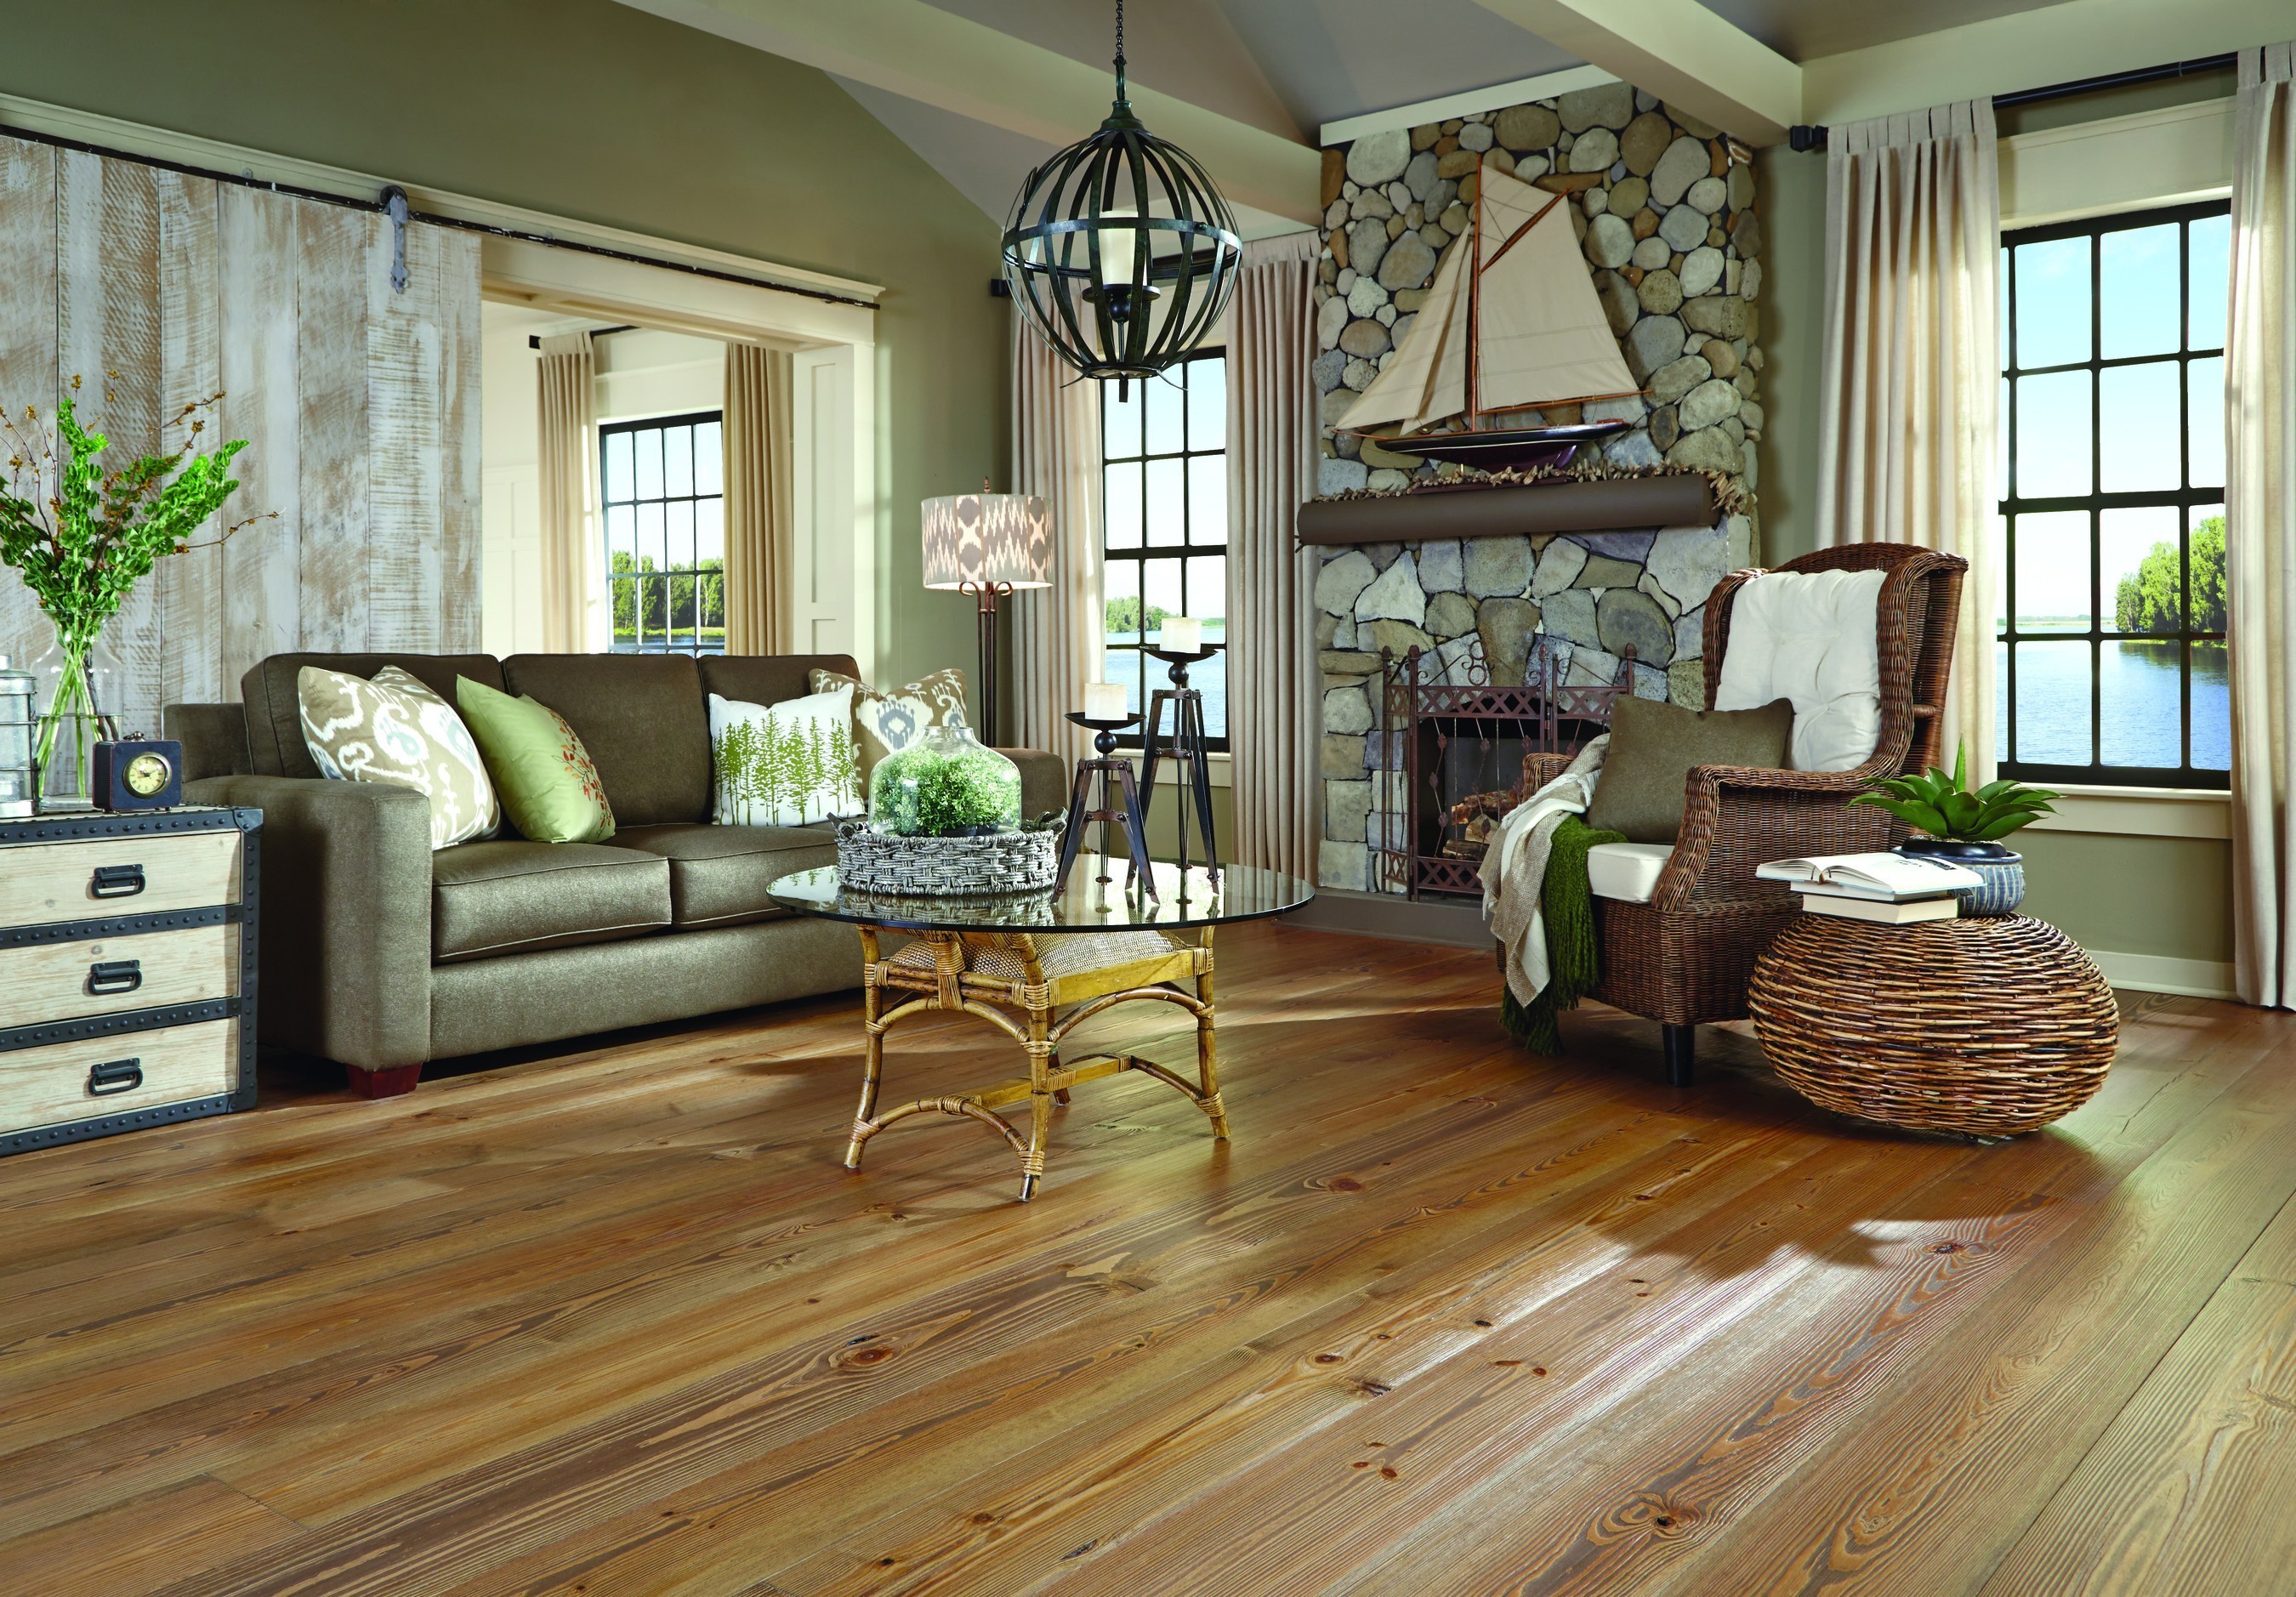 "Boathouse" From Carlisle Wide Plank Floors' New Lakehouse Collection